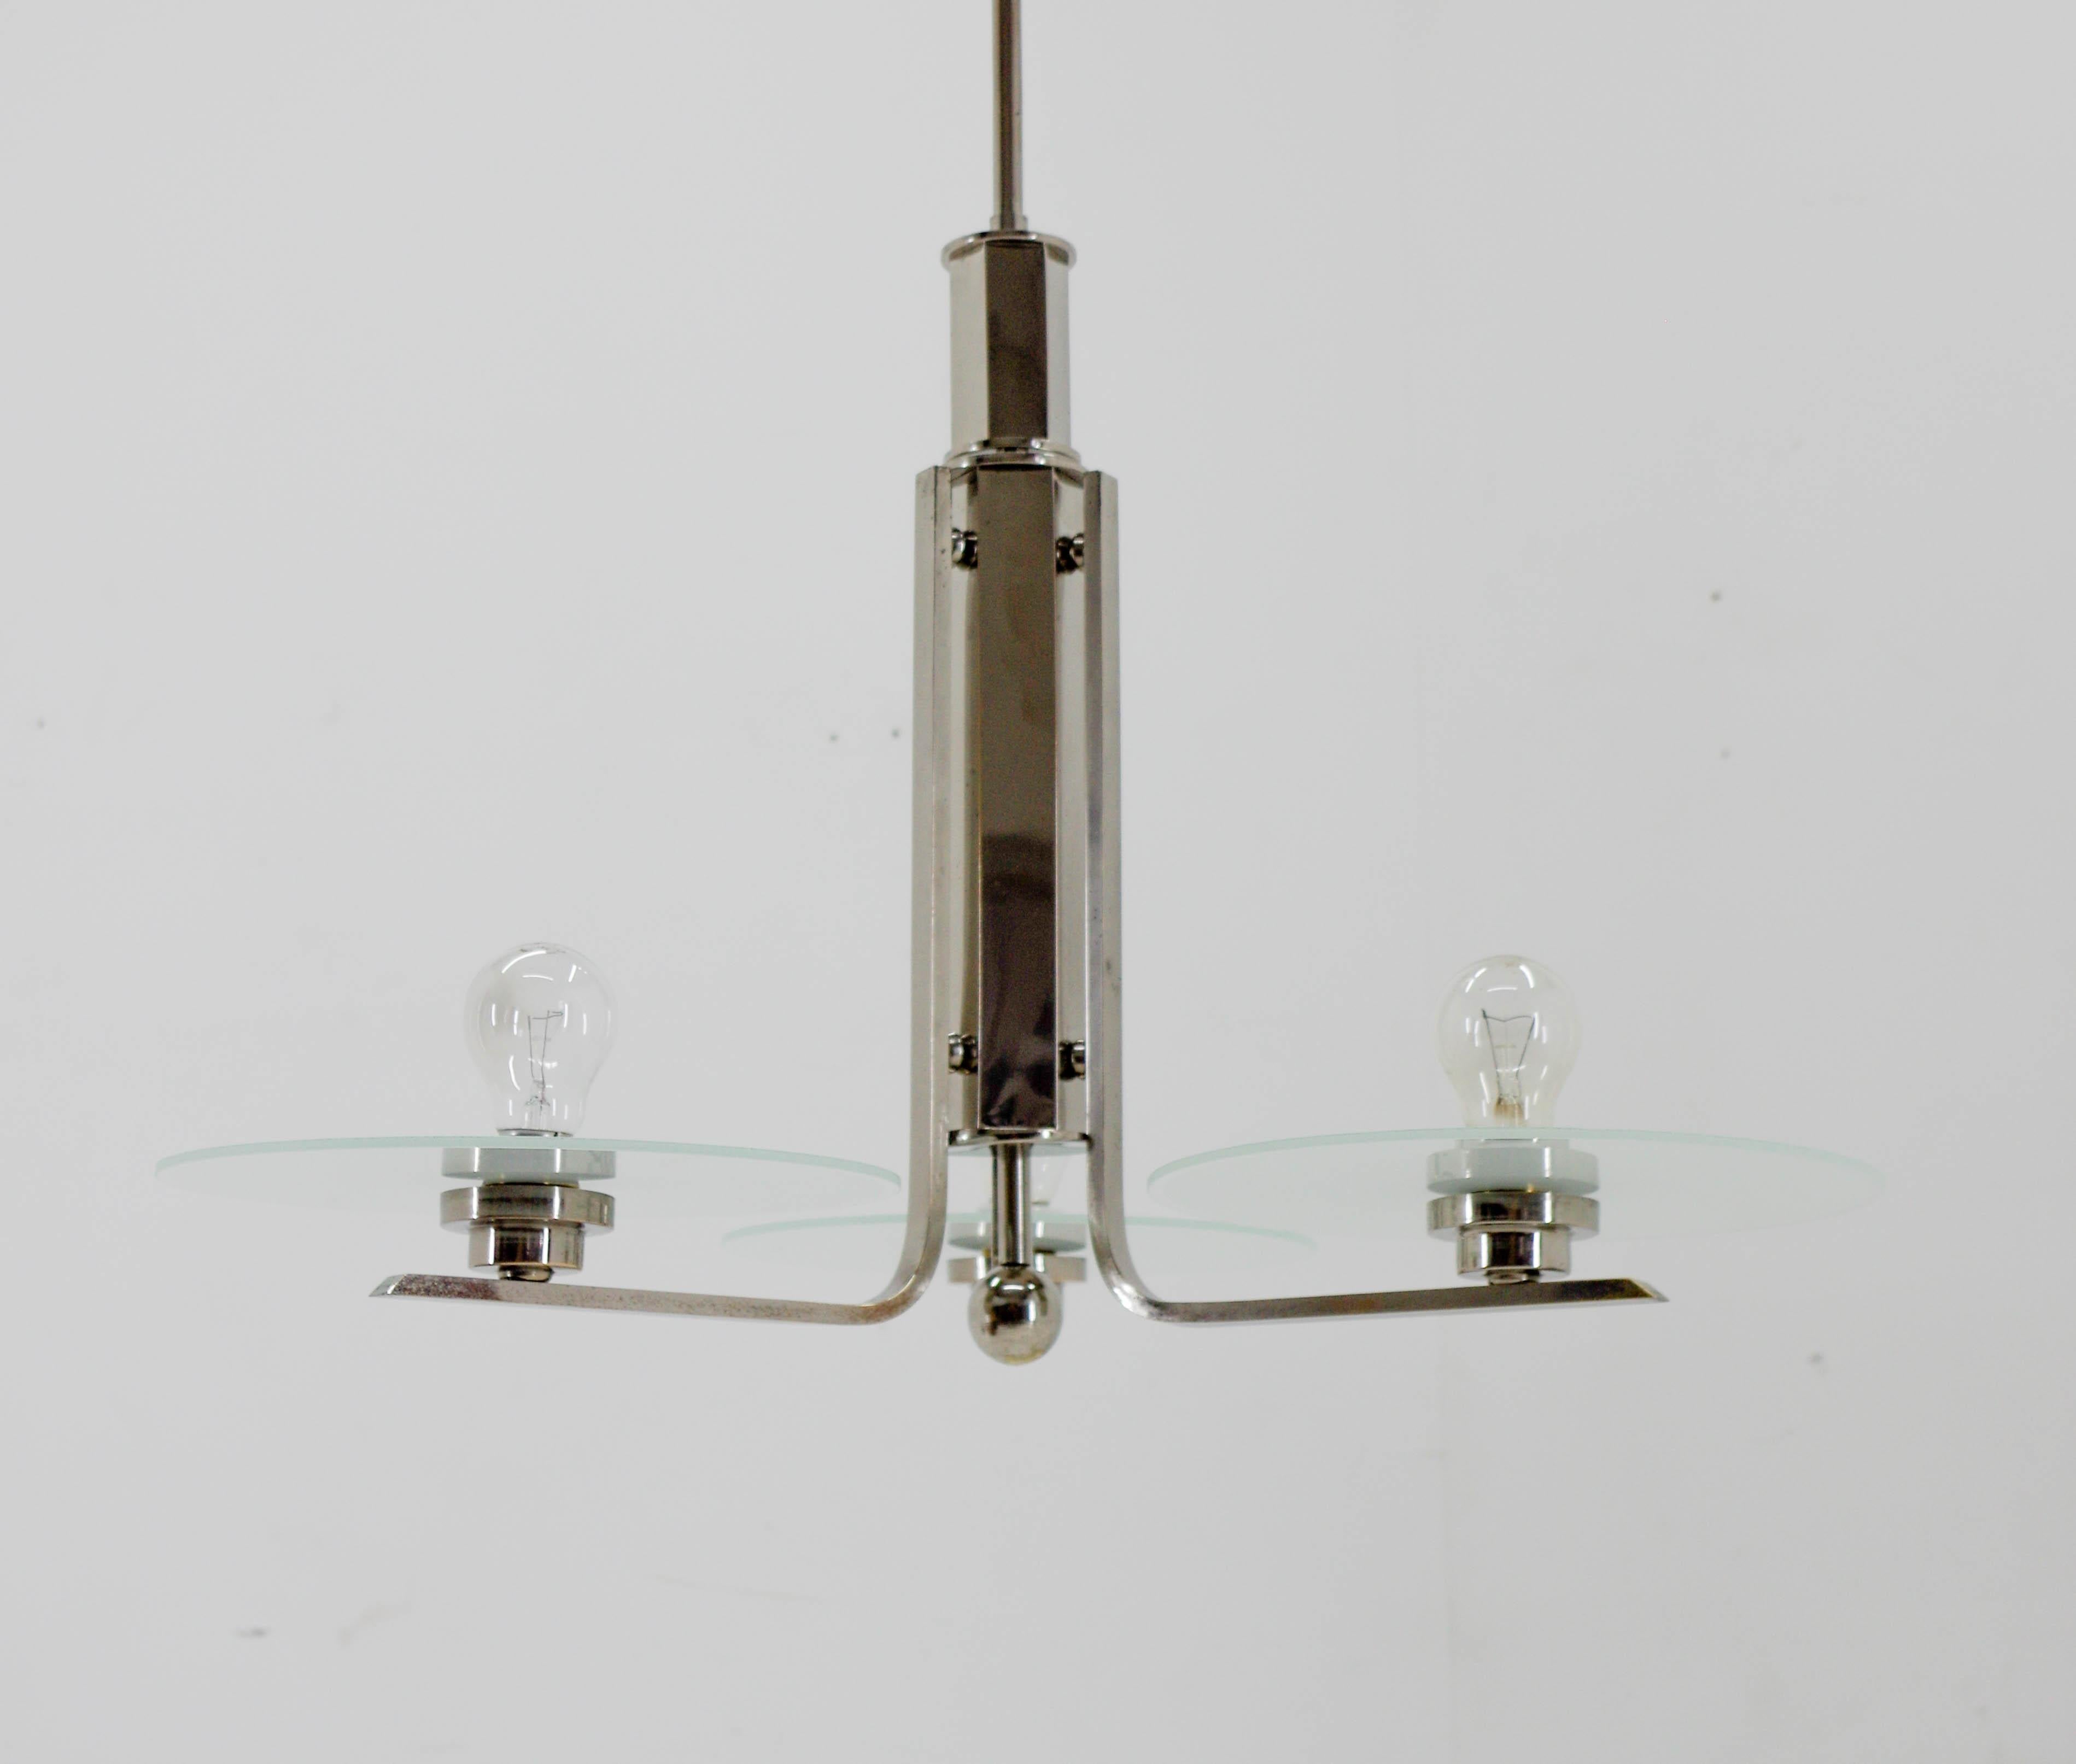 Bauhaus / Functionalist Chrome and Glass Chandelier, 1920s For Sale 3